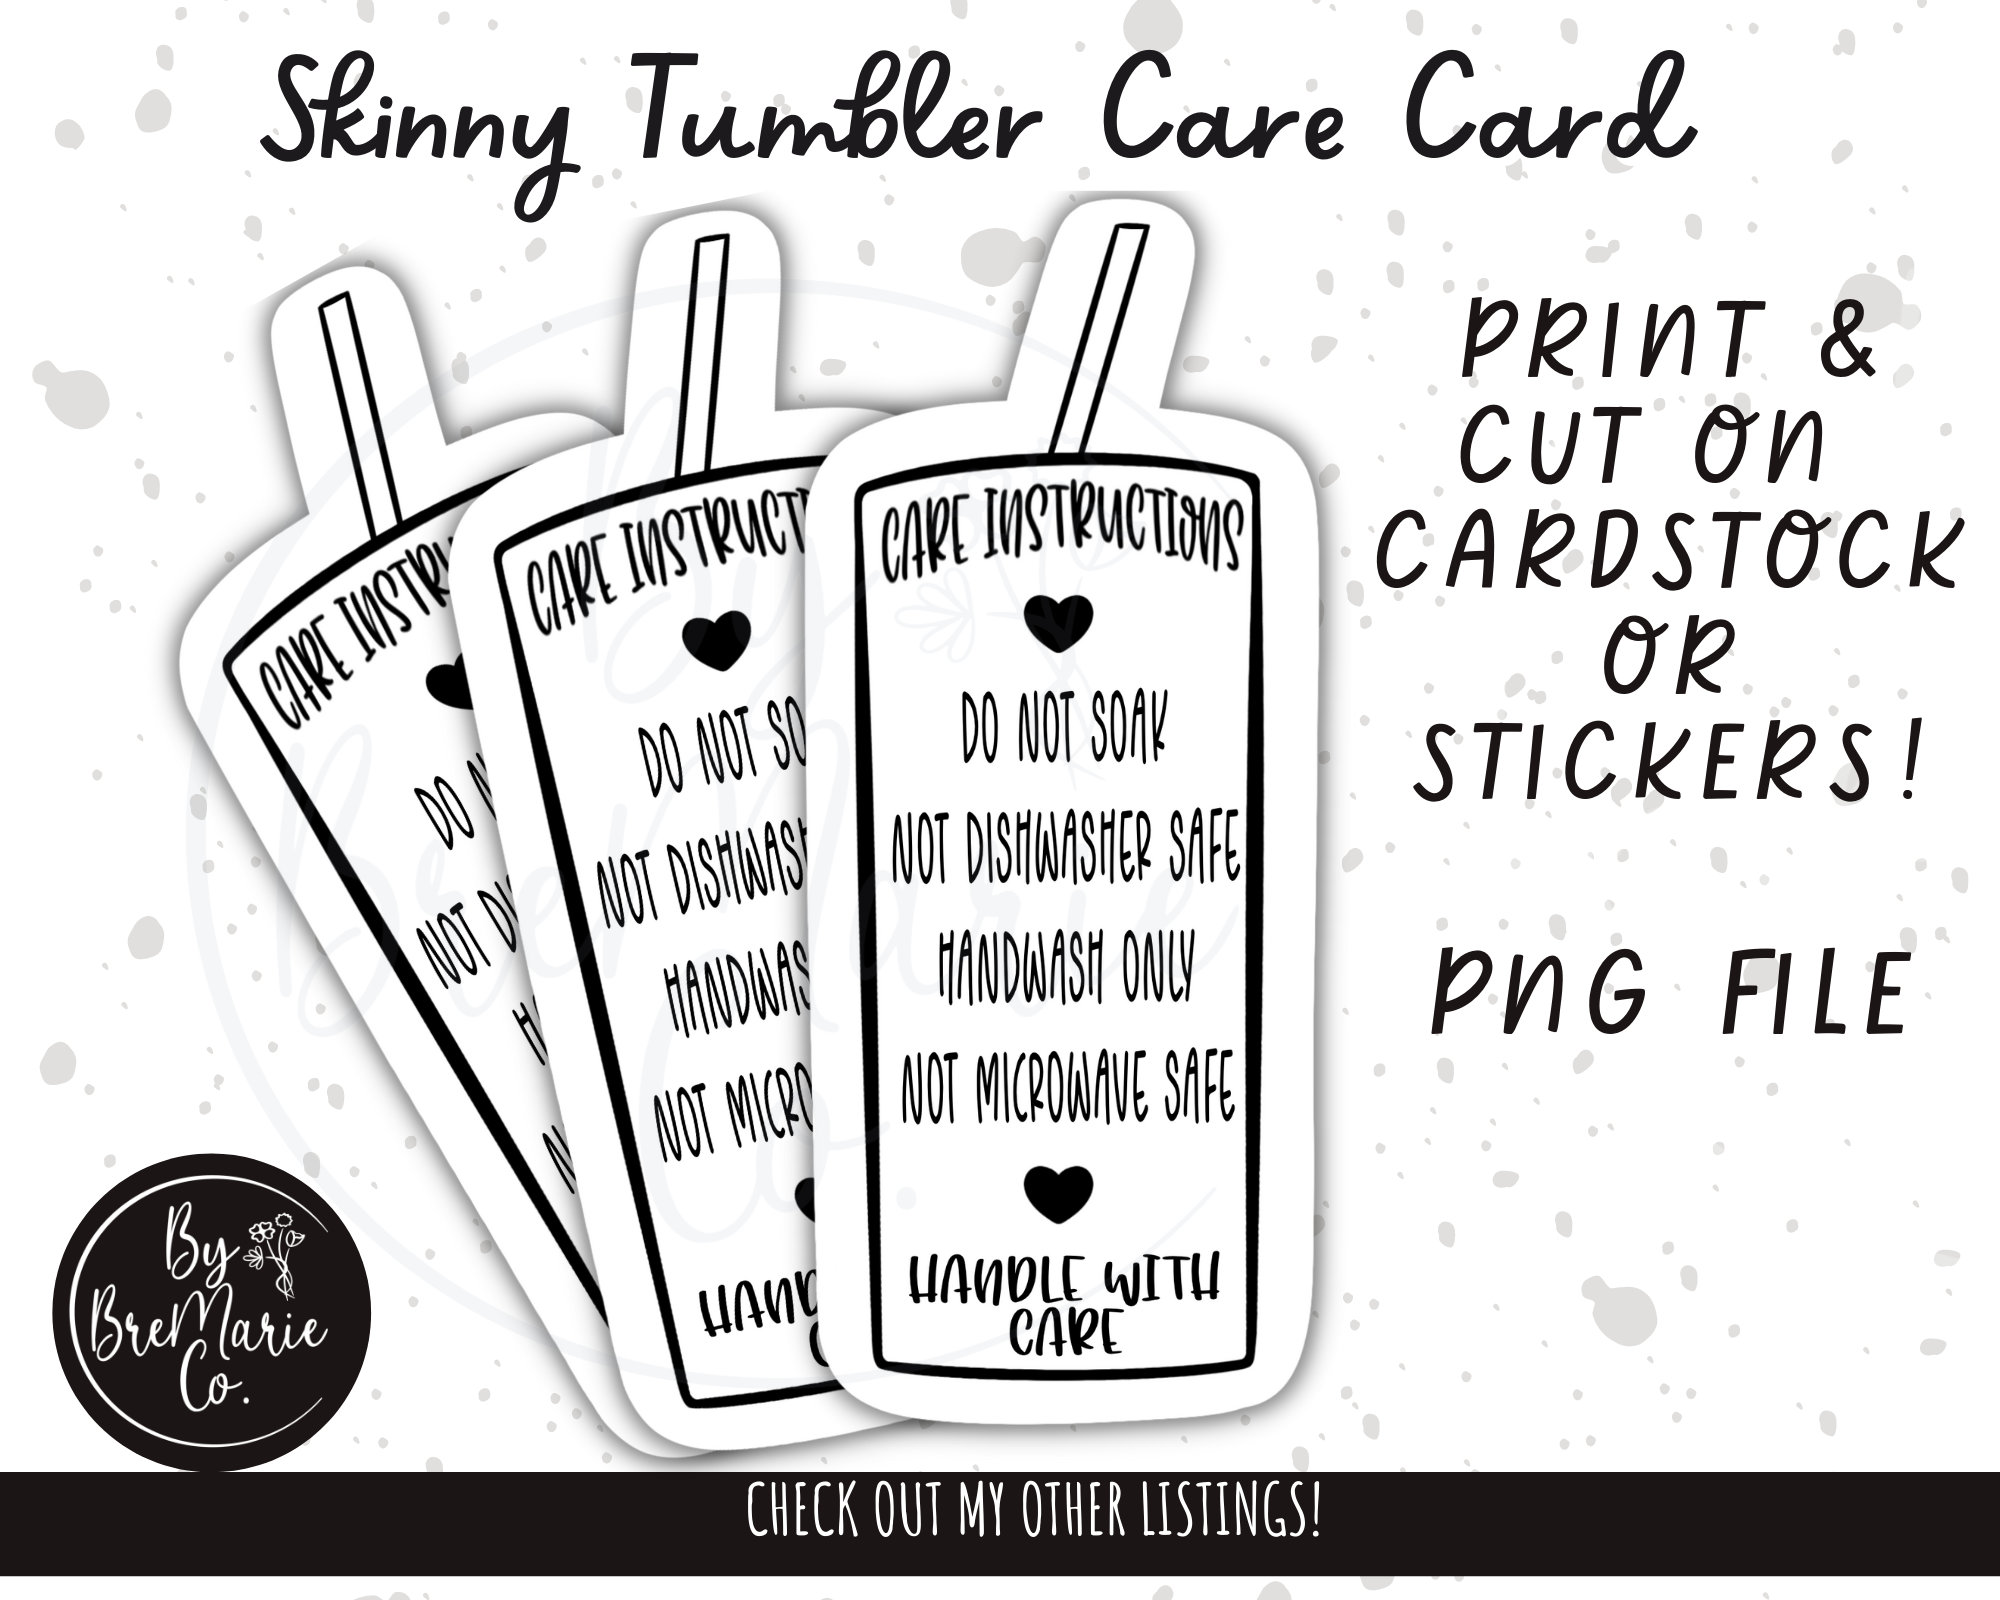 skinny-tumbler-care-card-sublimation-tumbler-care-print-and-etsy-denmark